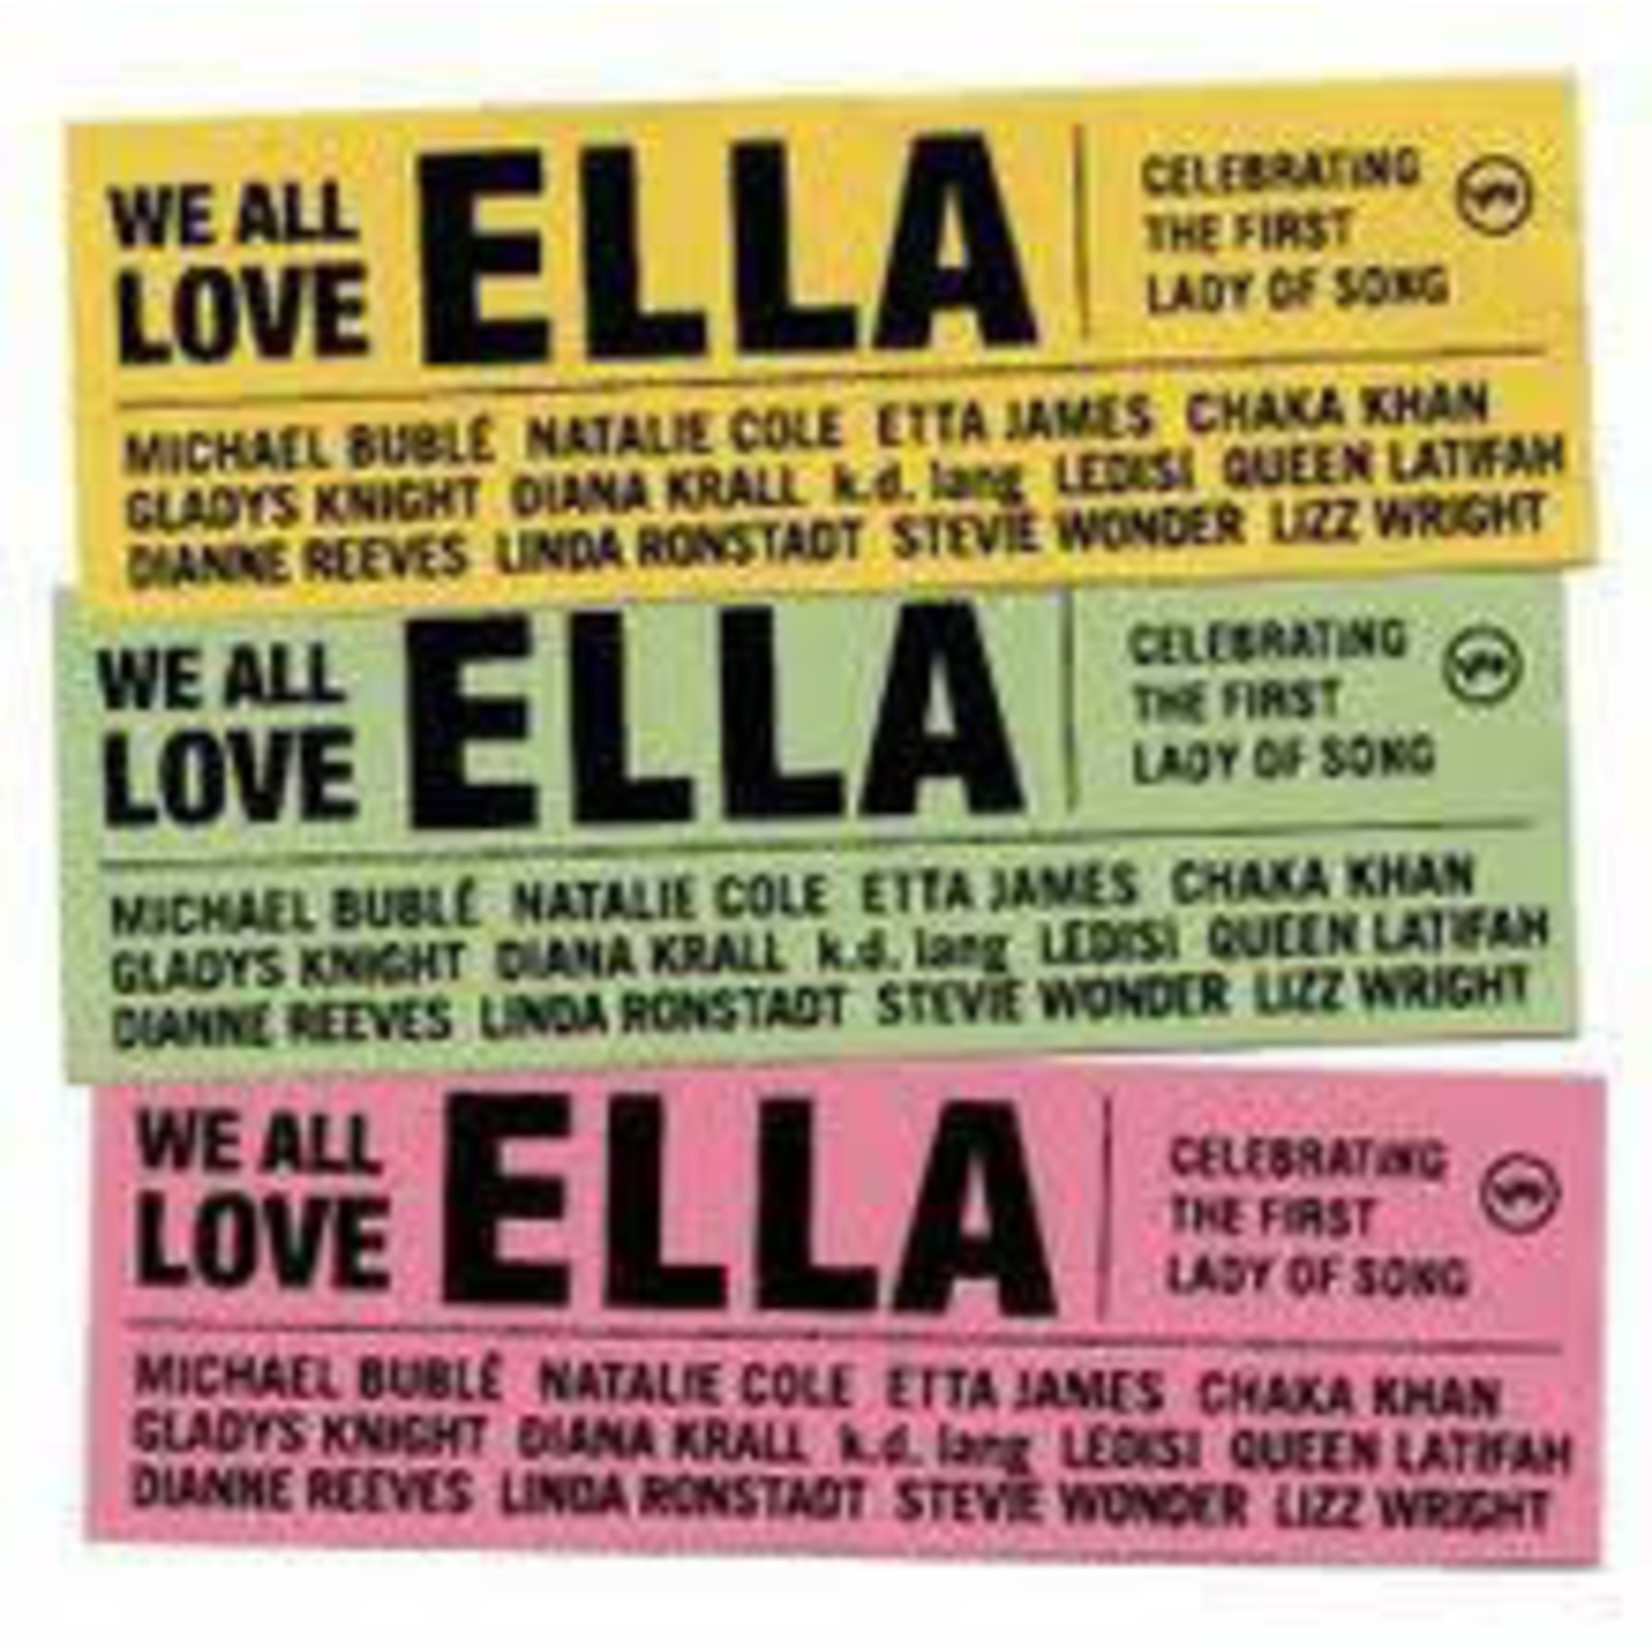 Various Artists - We All Love Ella: Celebrating The First Lady Of Song [USED CD]